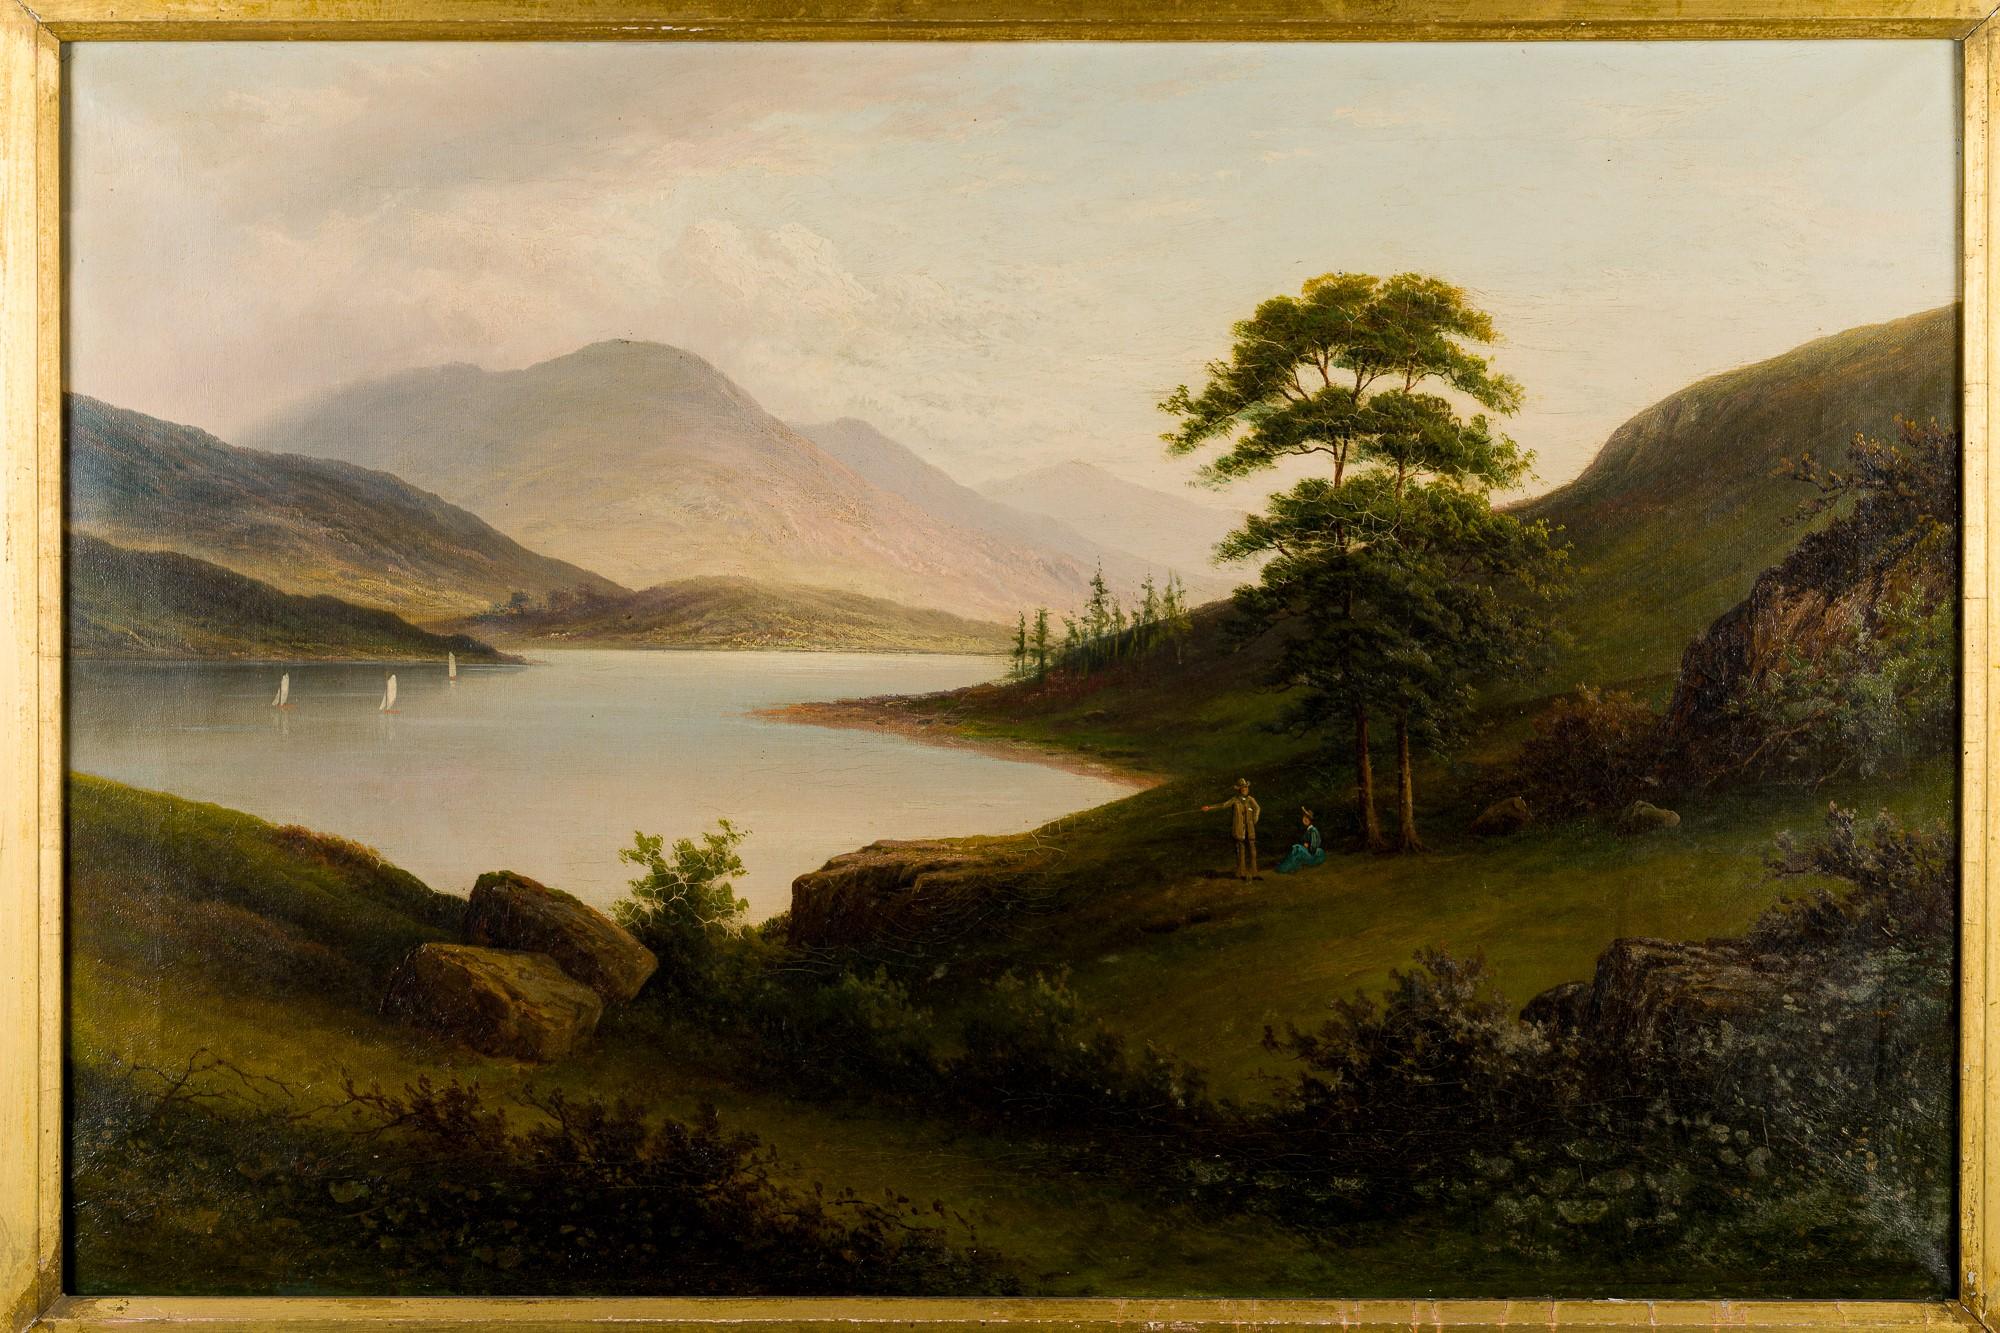 A Lake in a Mountain Valley” is typical of Thomas Doughty’s idealized American landscapes, with some if the characteristic colors as the pink in the sky and subjects as the cluster of small sail boats placed on the left side of the painting to